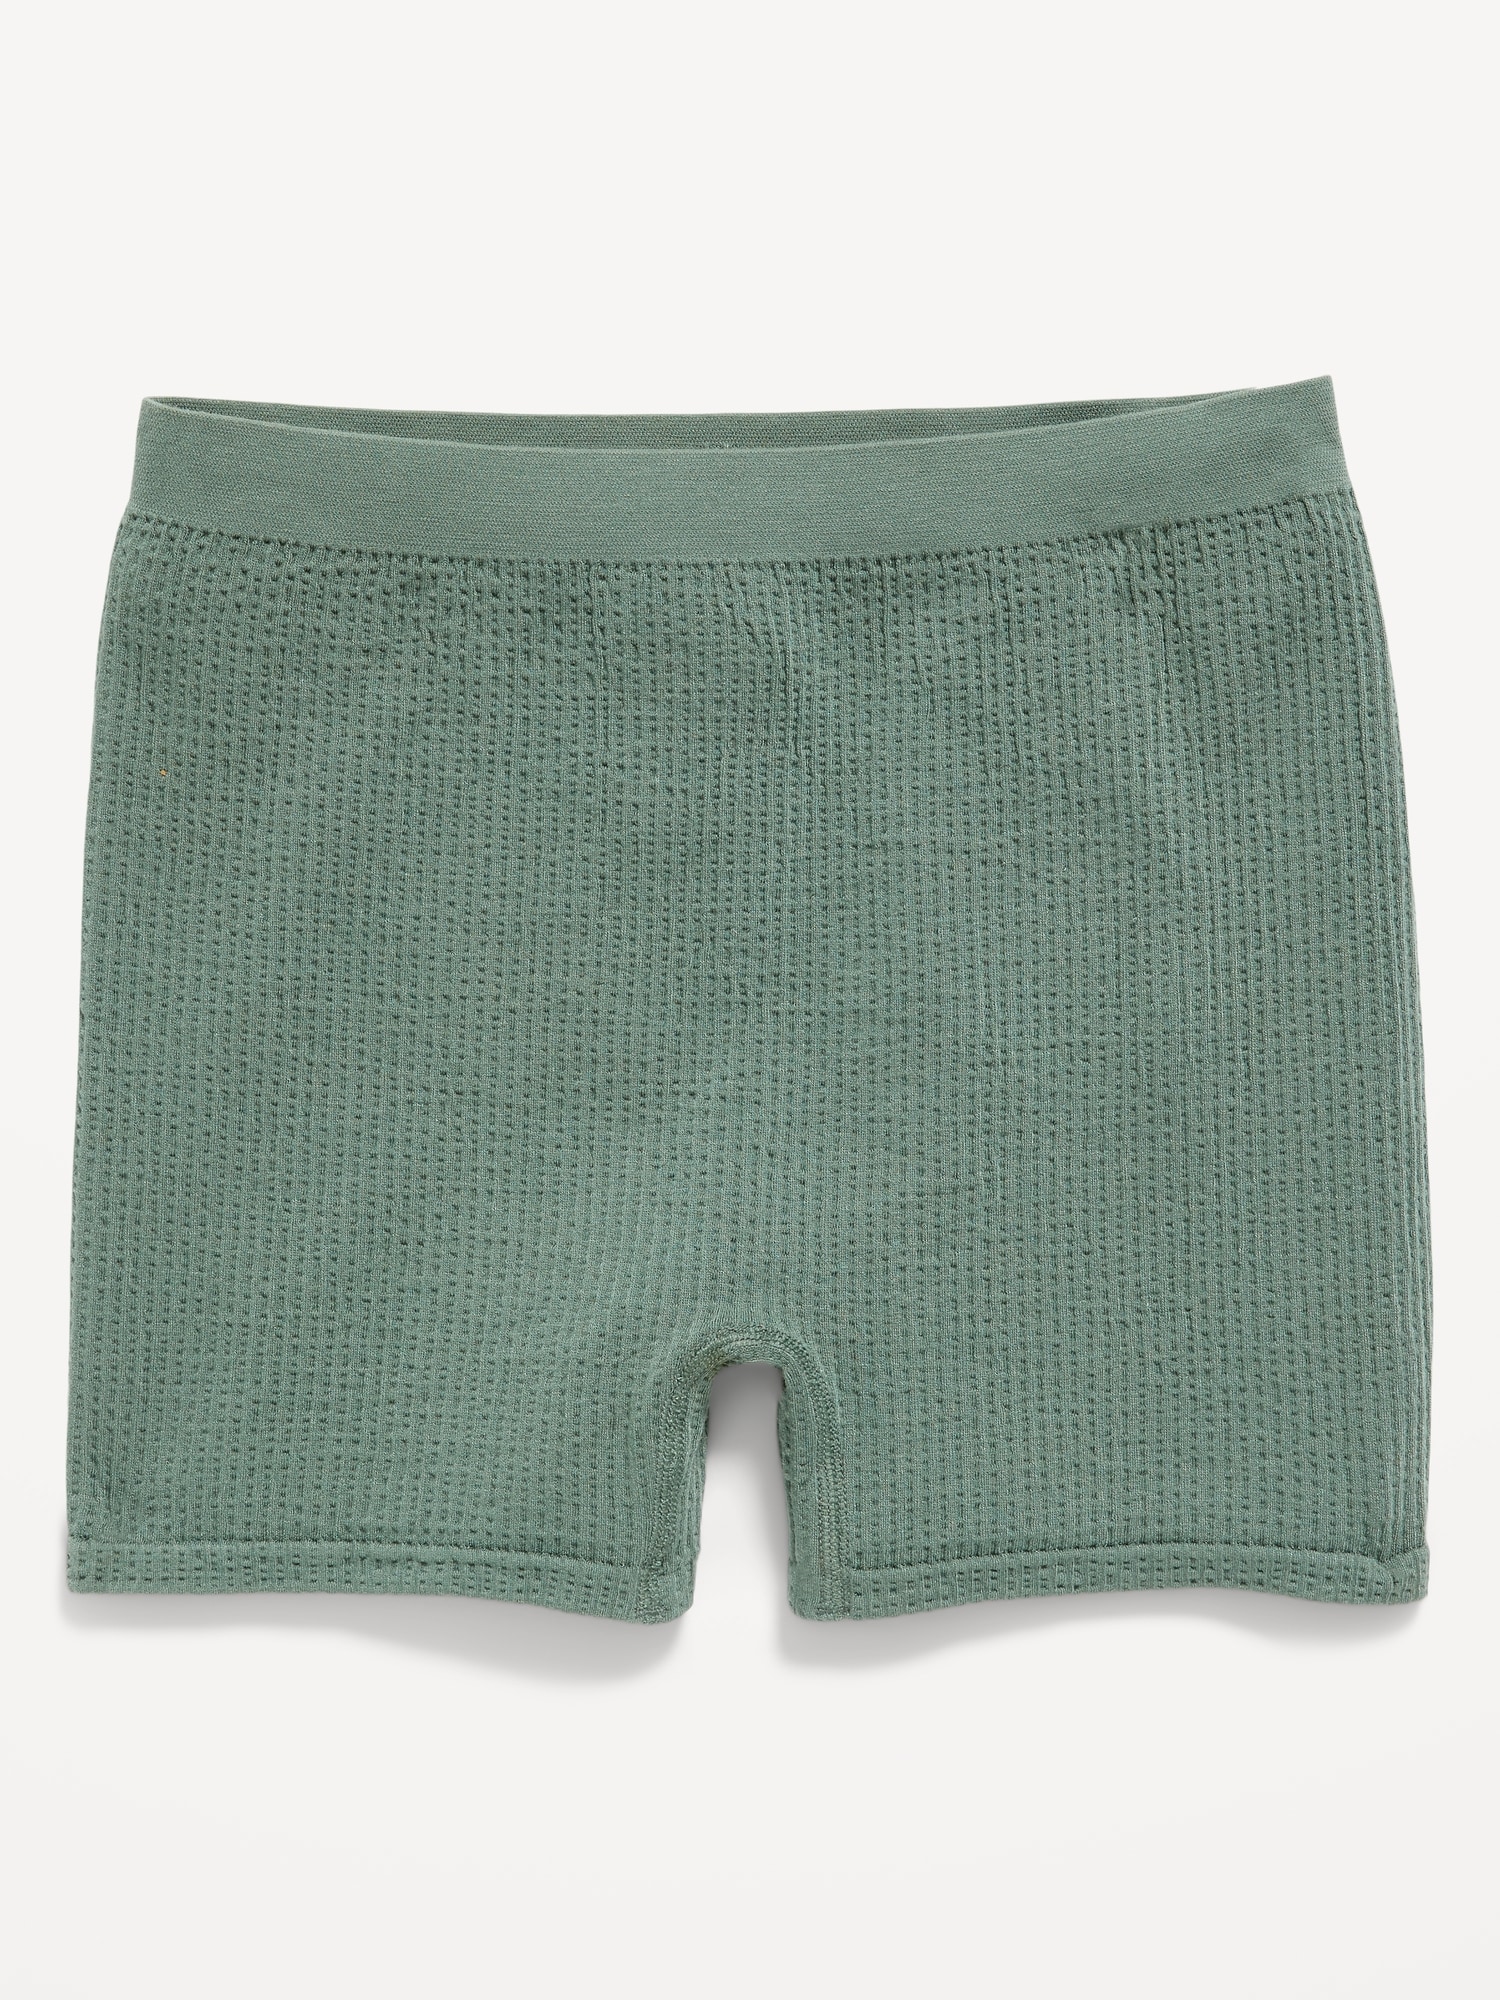 Old Navy Boys'horts Underwear 7-Pack for Girls